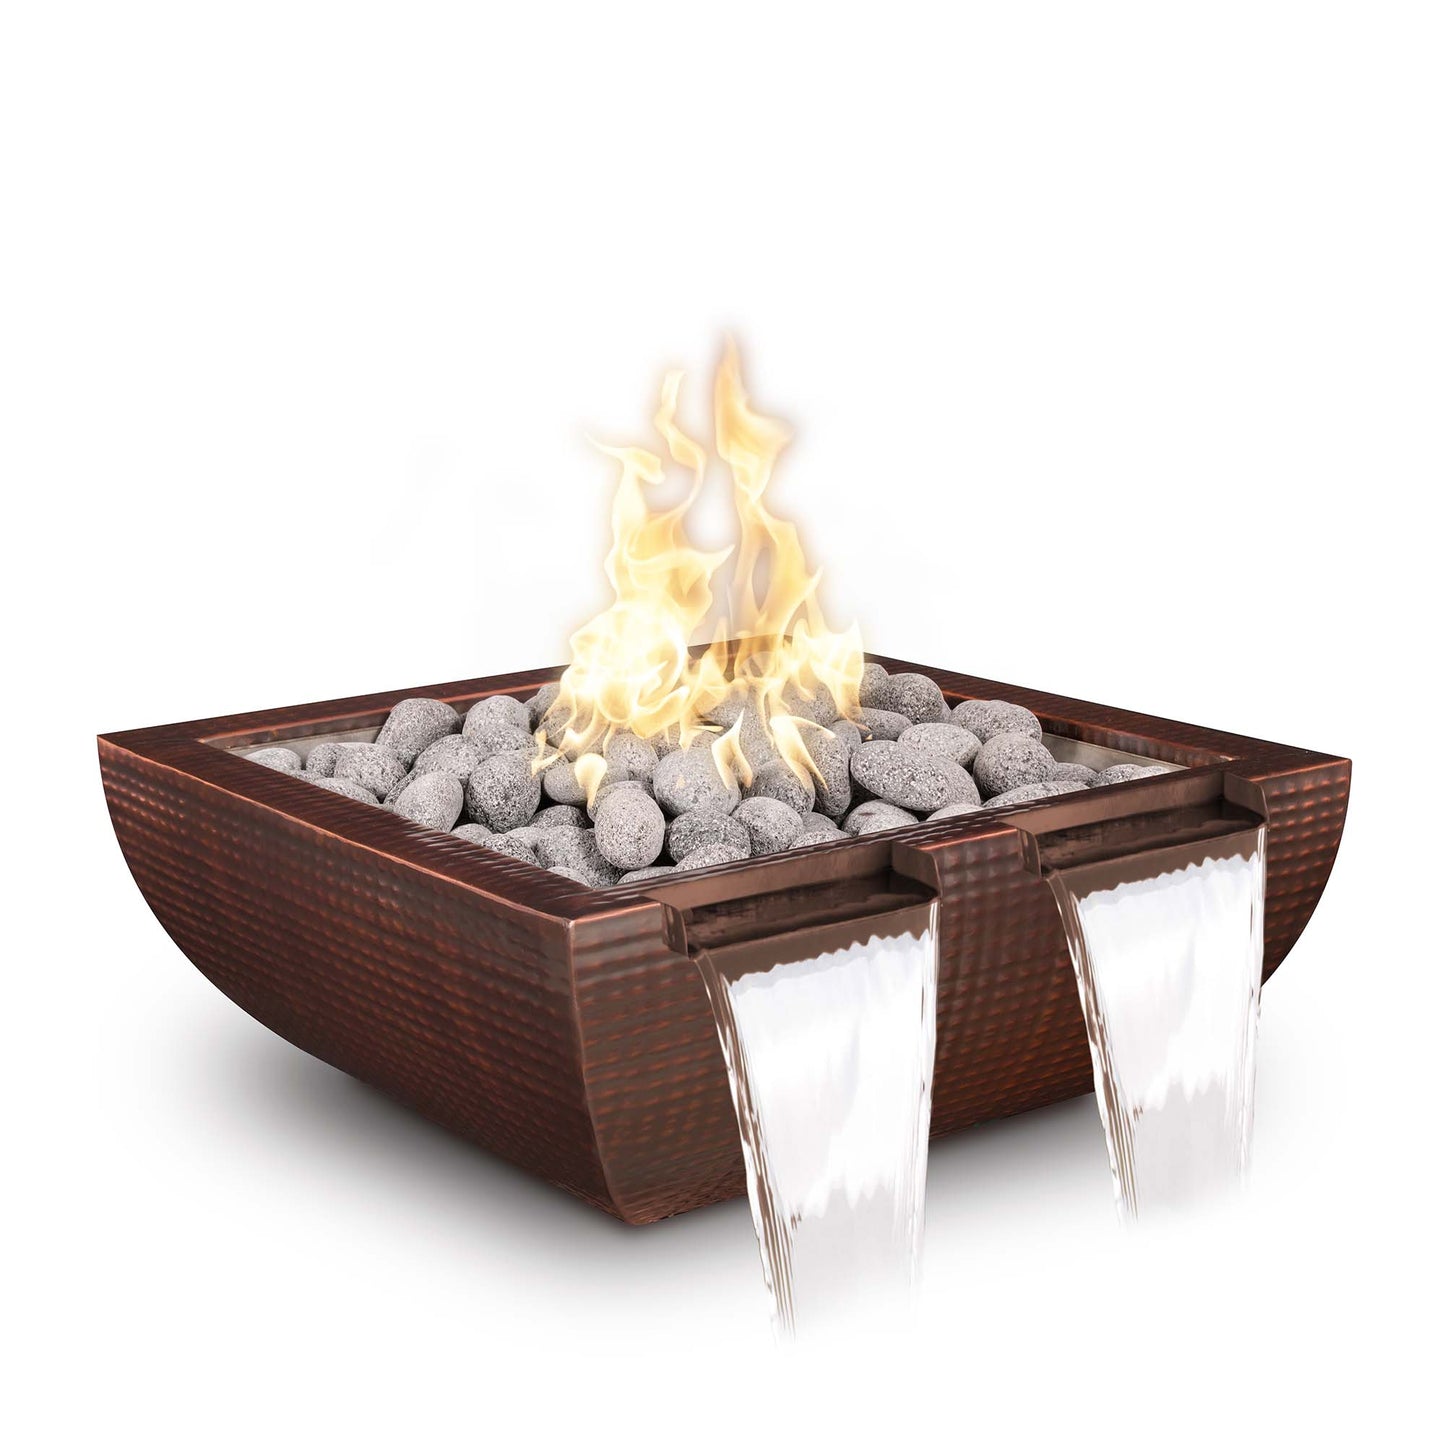 The Outdoor Plus Avalon Twin Spill 36" Black Powder Coated Metal Liquid Propane Fire & Water Bowl with Match Lit Ignition